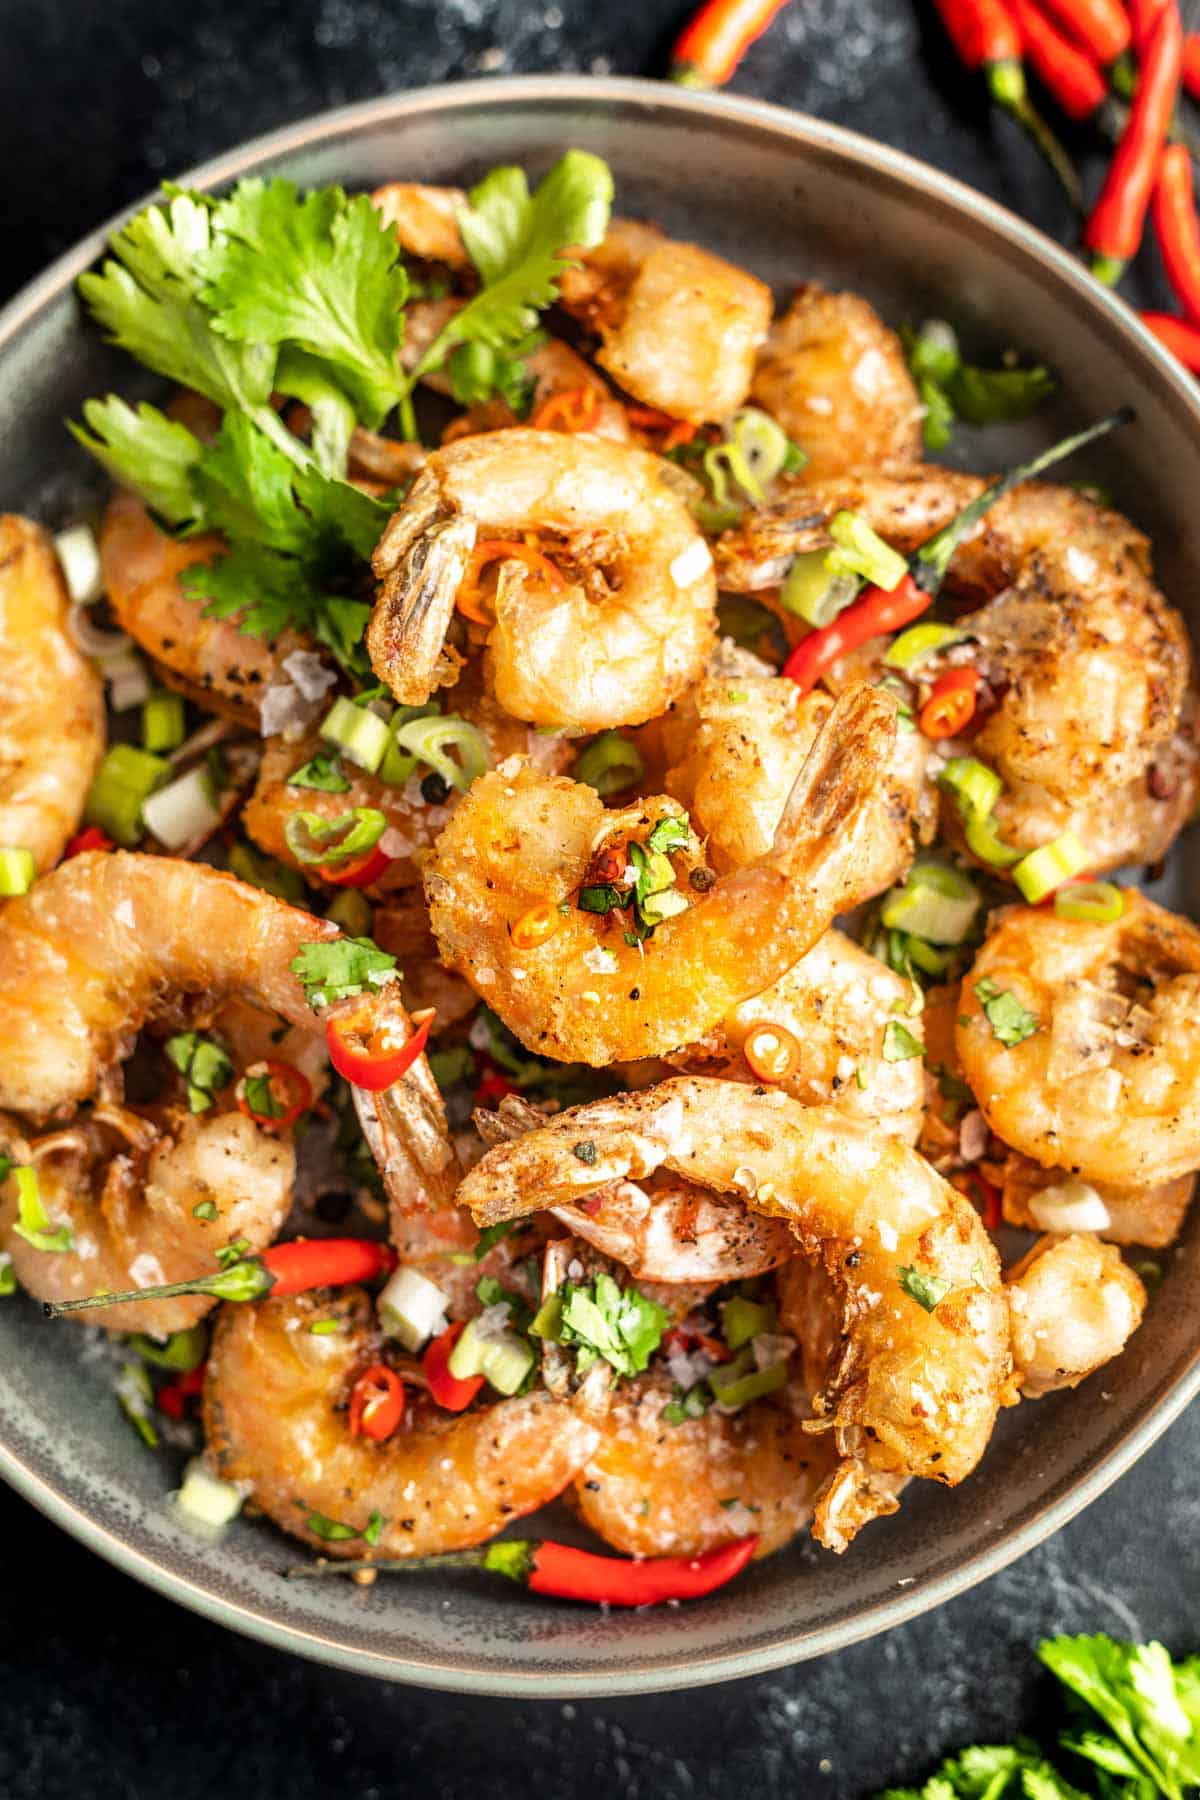 Keto Salt and Pepper Shrimp in a bowl topped with green onions, cilantro, and chiles.